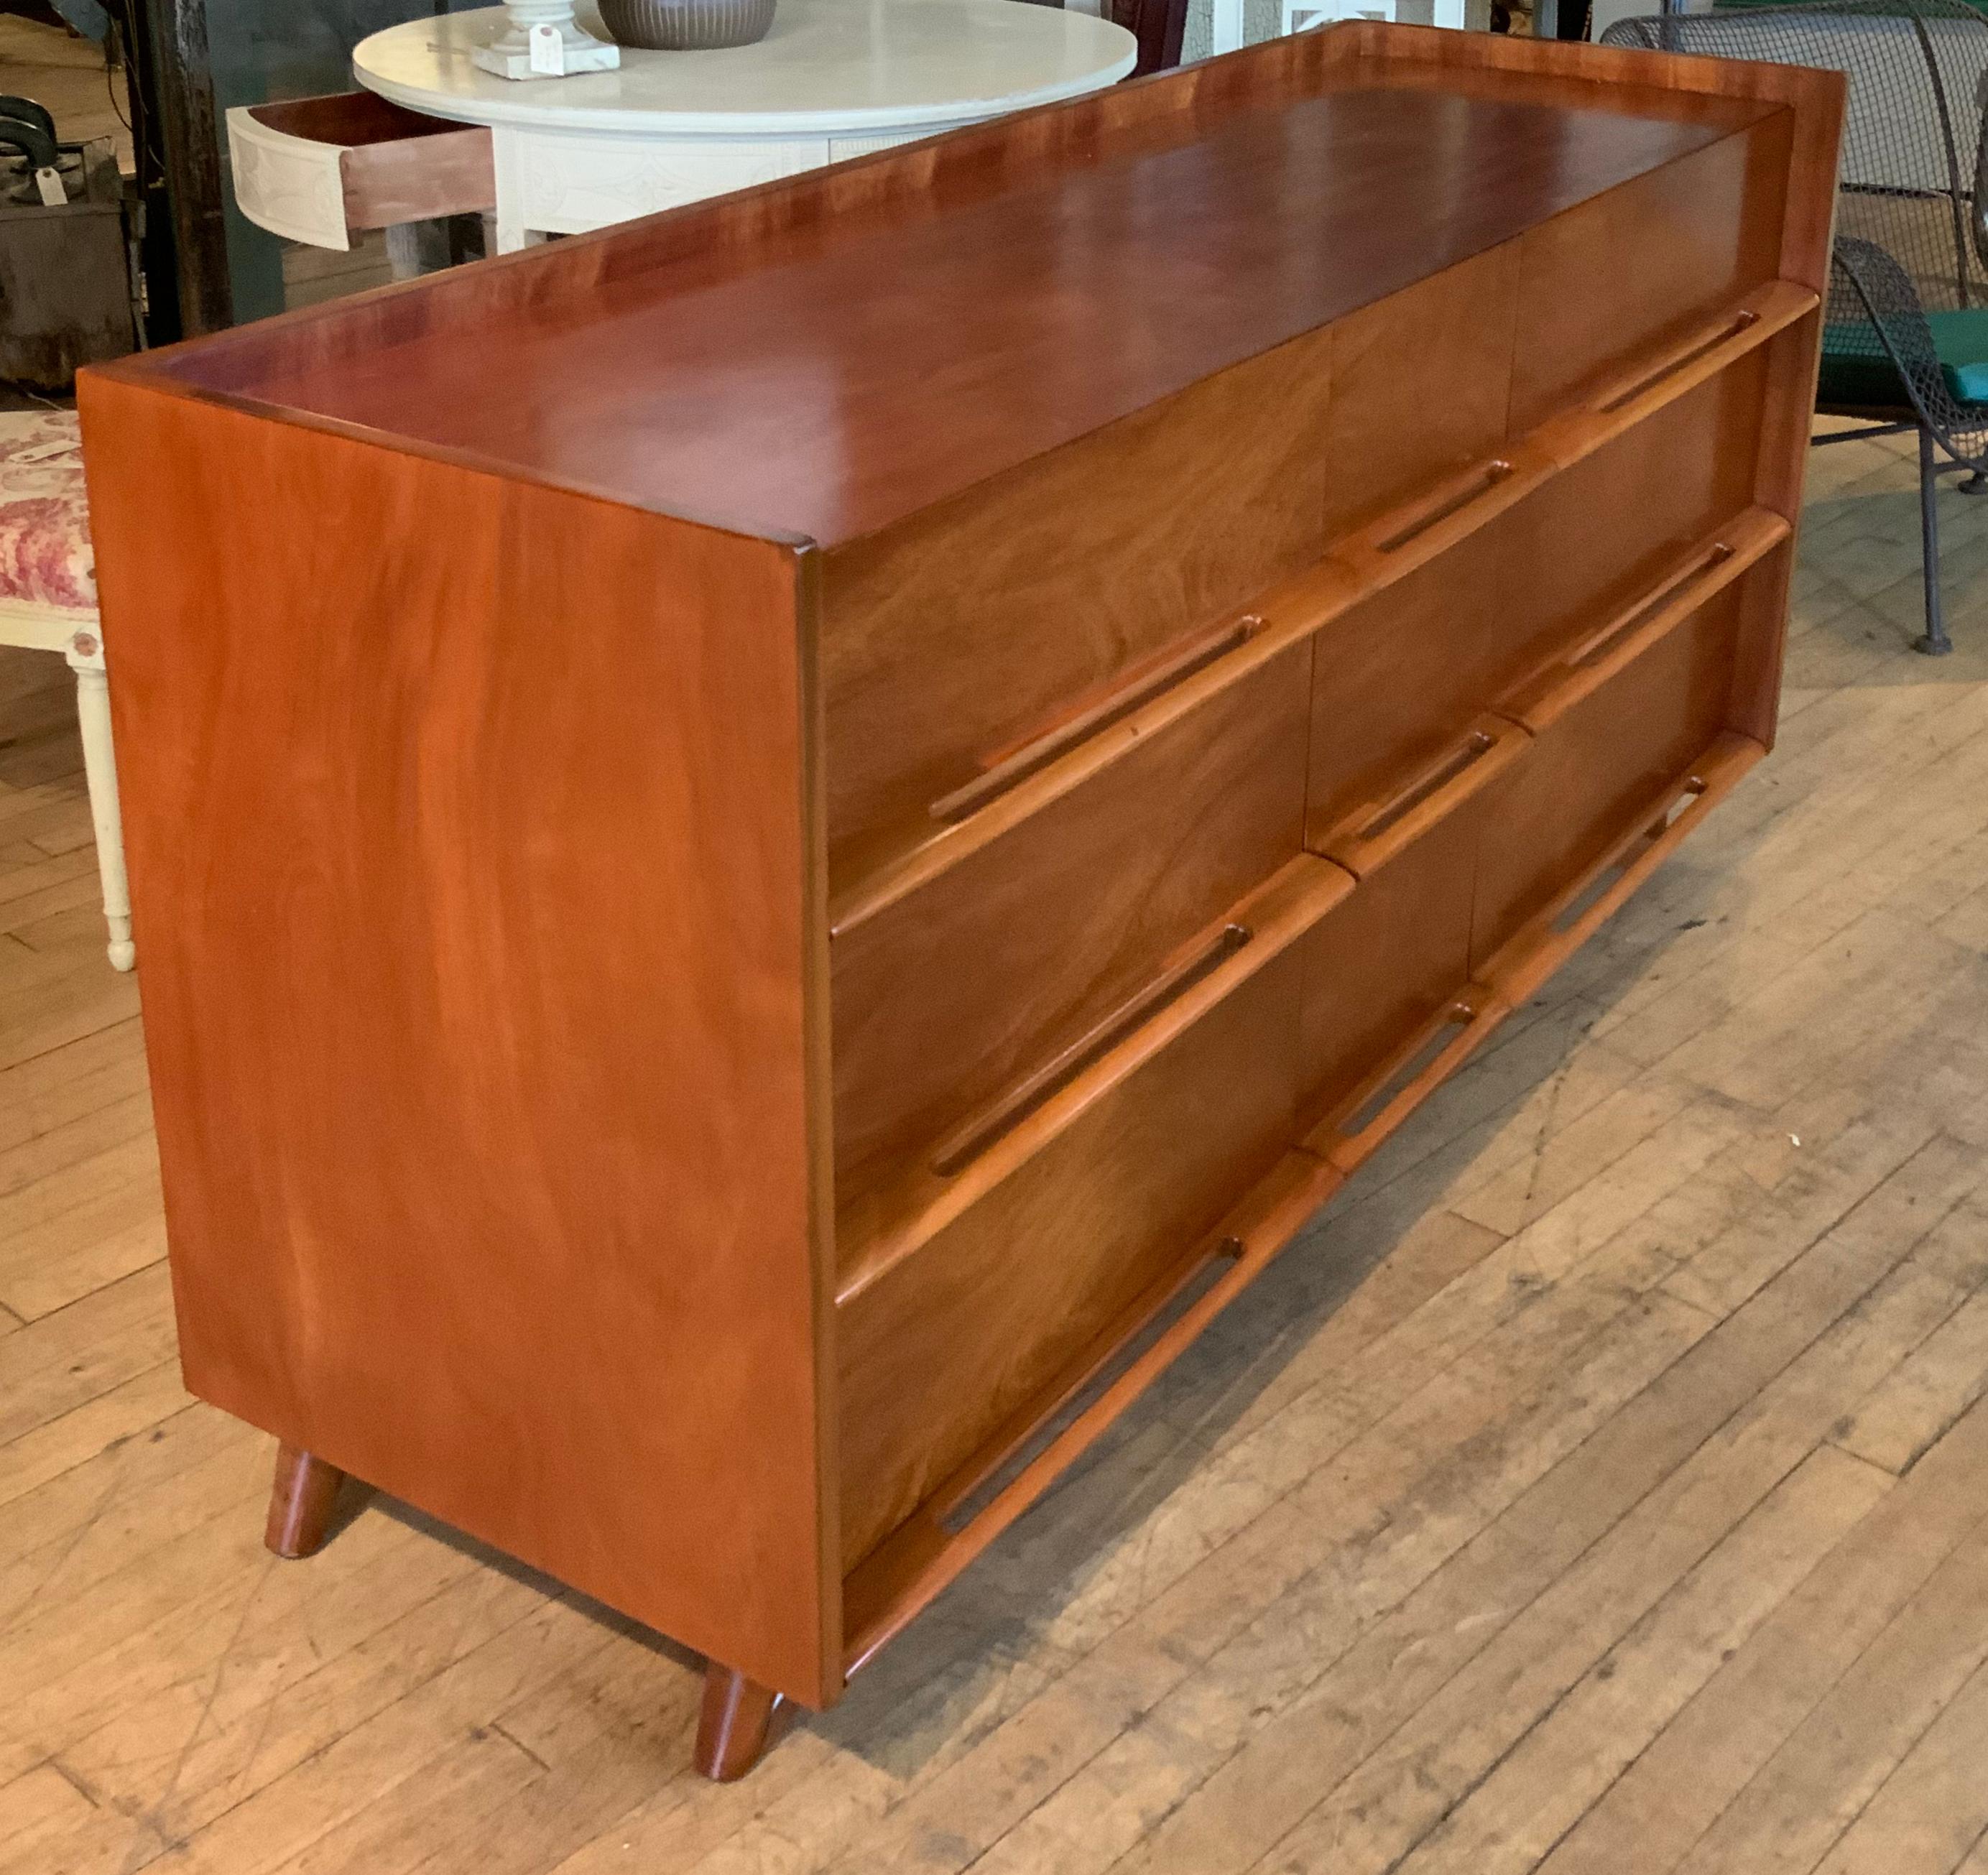 A beautiful large nine drawer 1950's chest, in nicely figured mahogany. Handsome design with the drawer pulls integrated into the extension at the base of each drawer, in the manner of Edmund Spence. beautifully refinished.